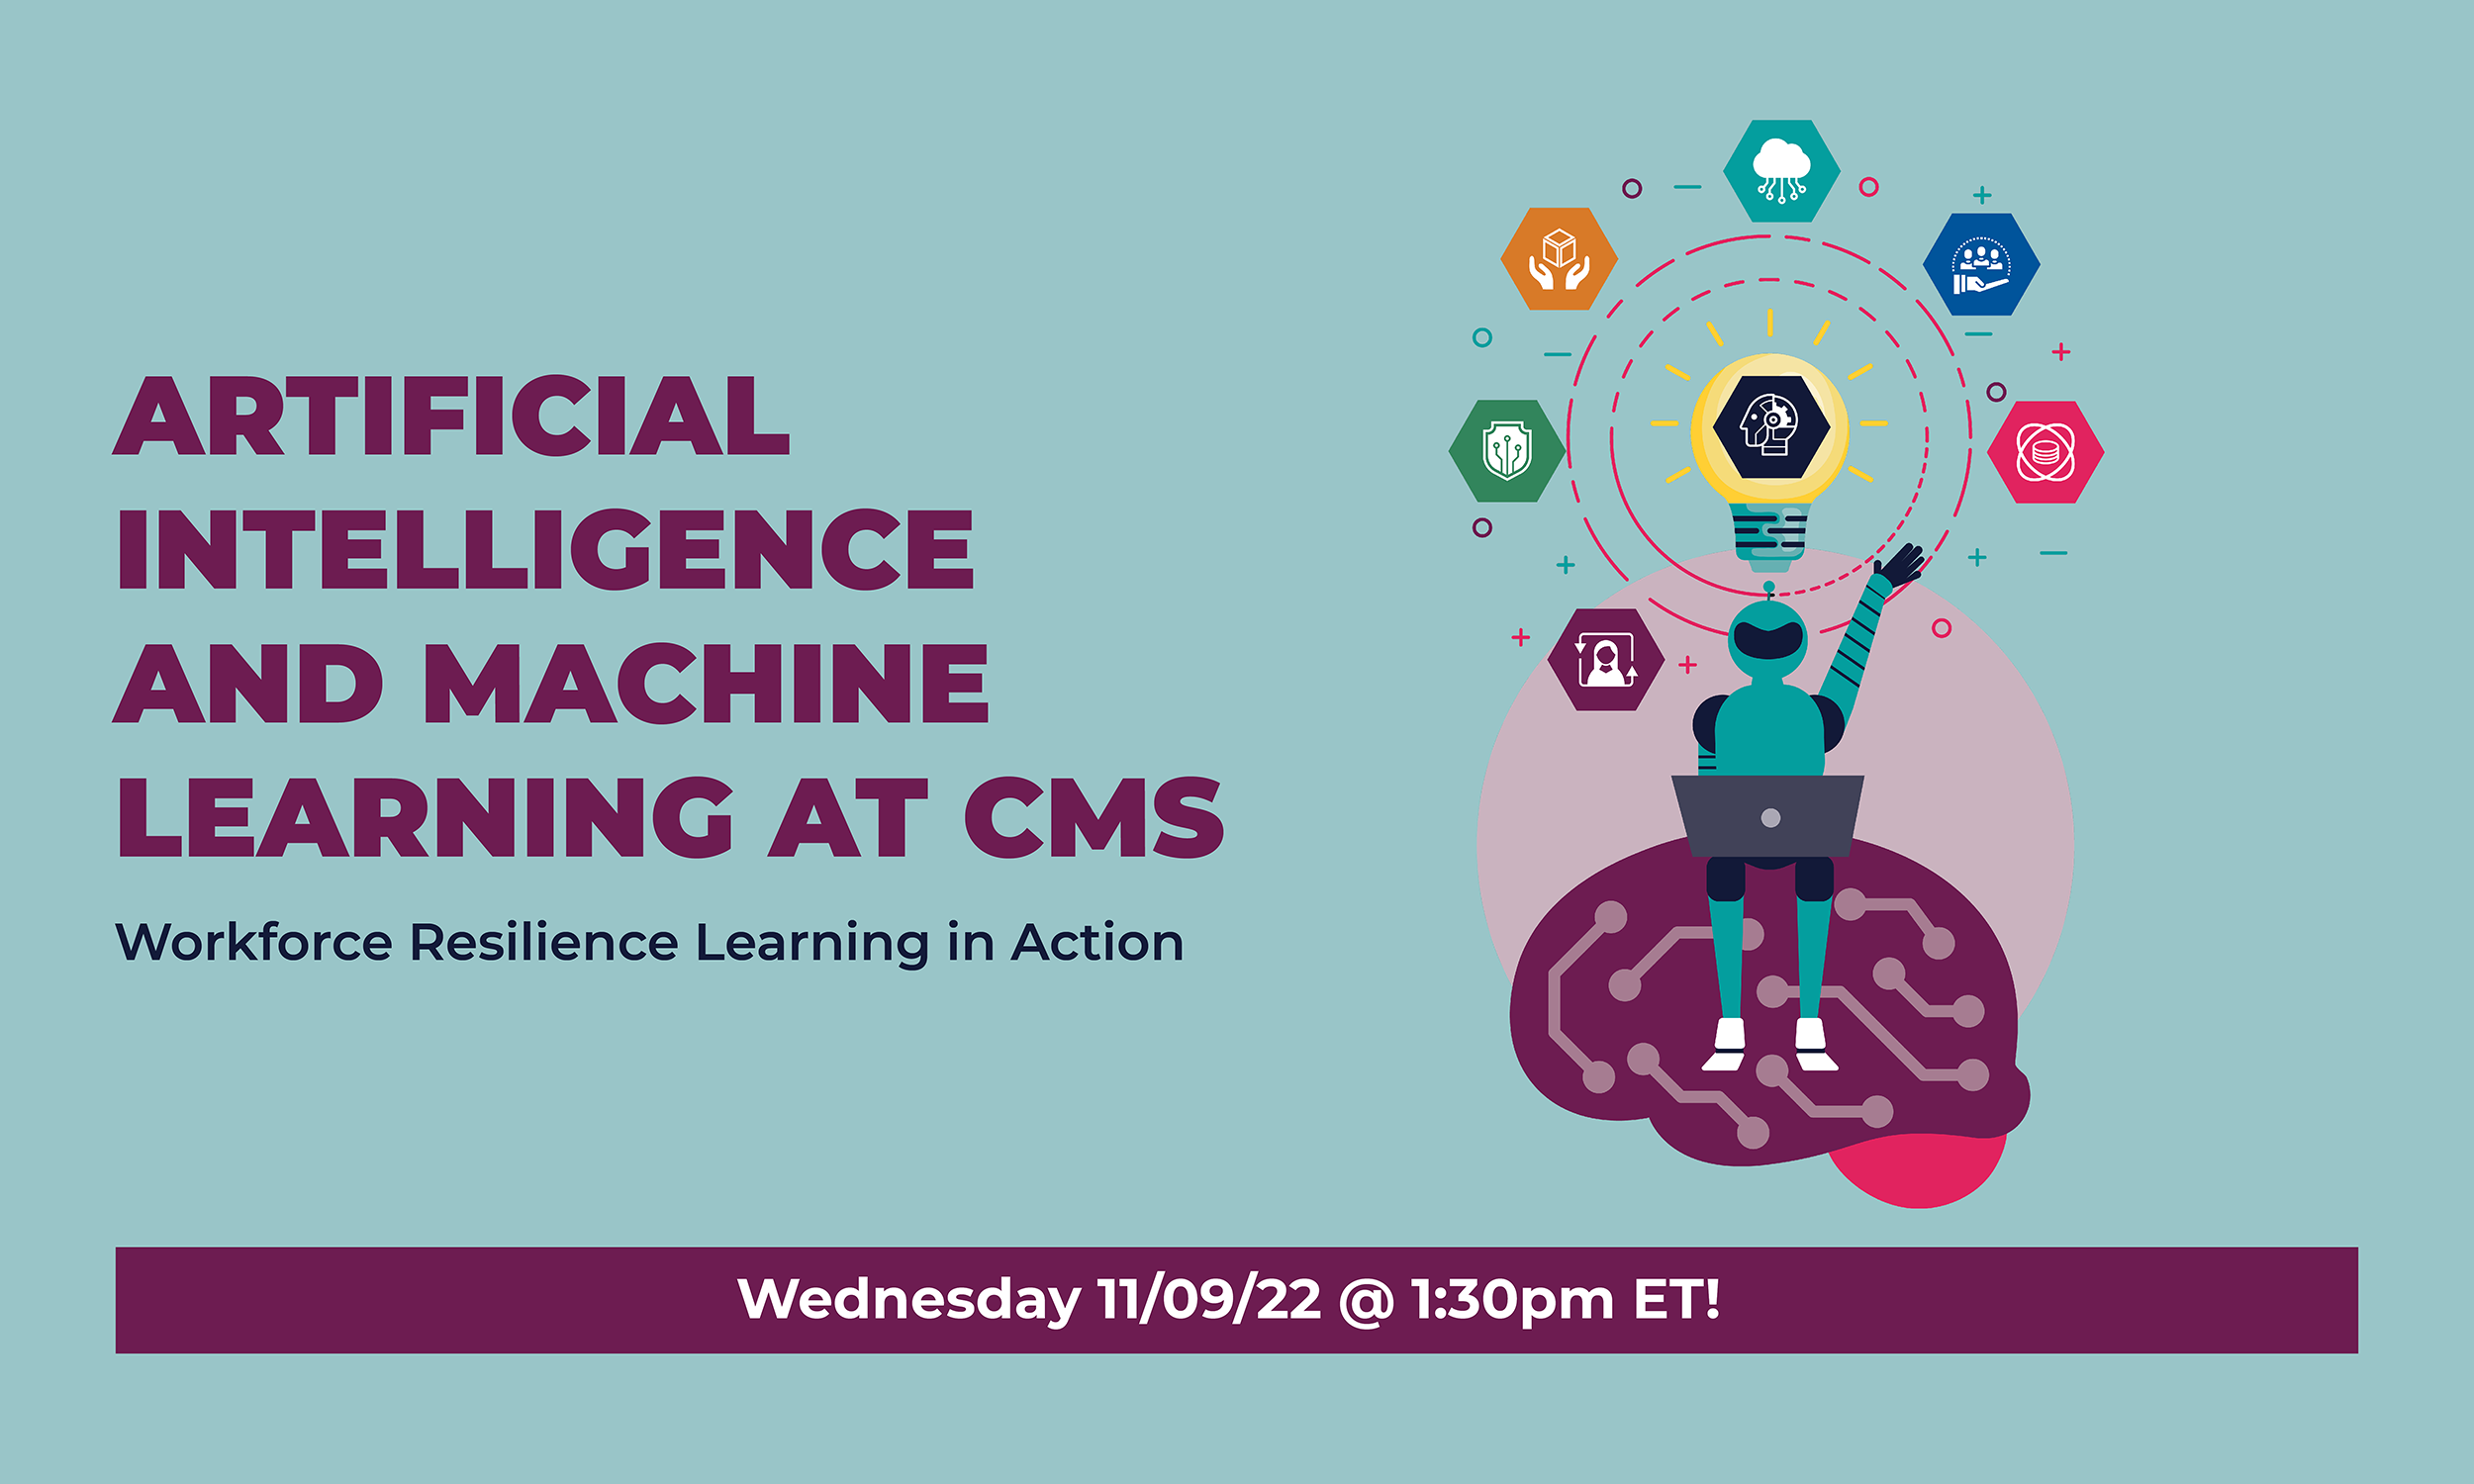 Graphic promoting Workforce Resilience Learning in Action session on Artificial Intelligence and Machine Learning at CMS on Wednesday, November 9 at 1:30pm ET.